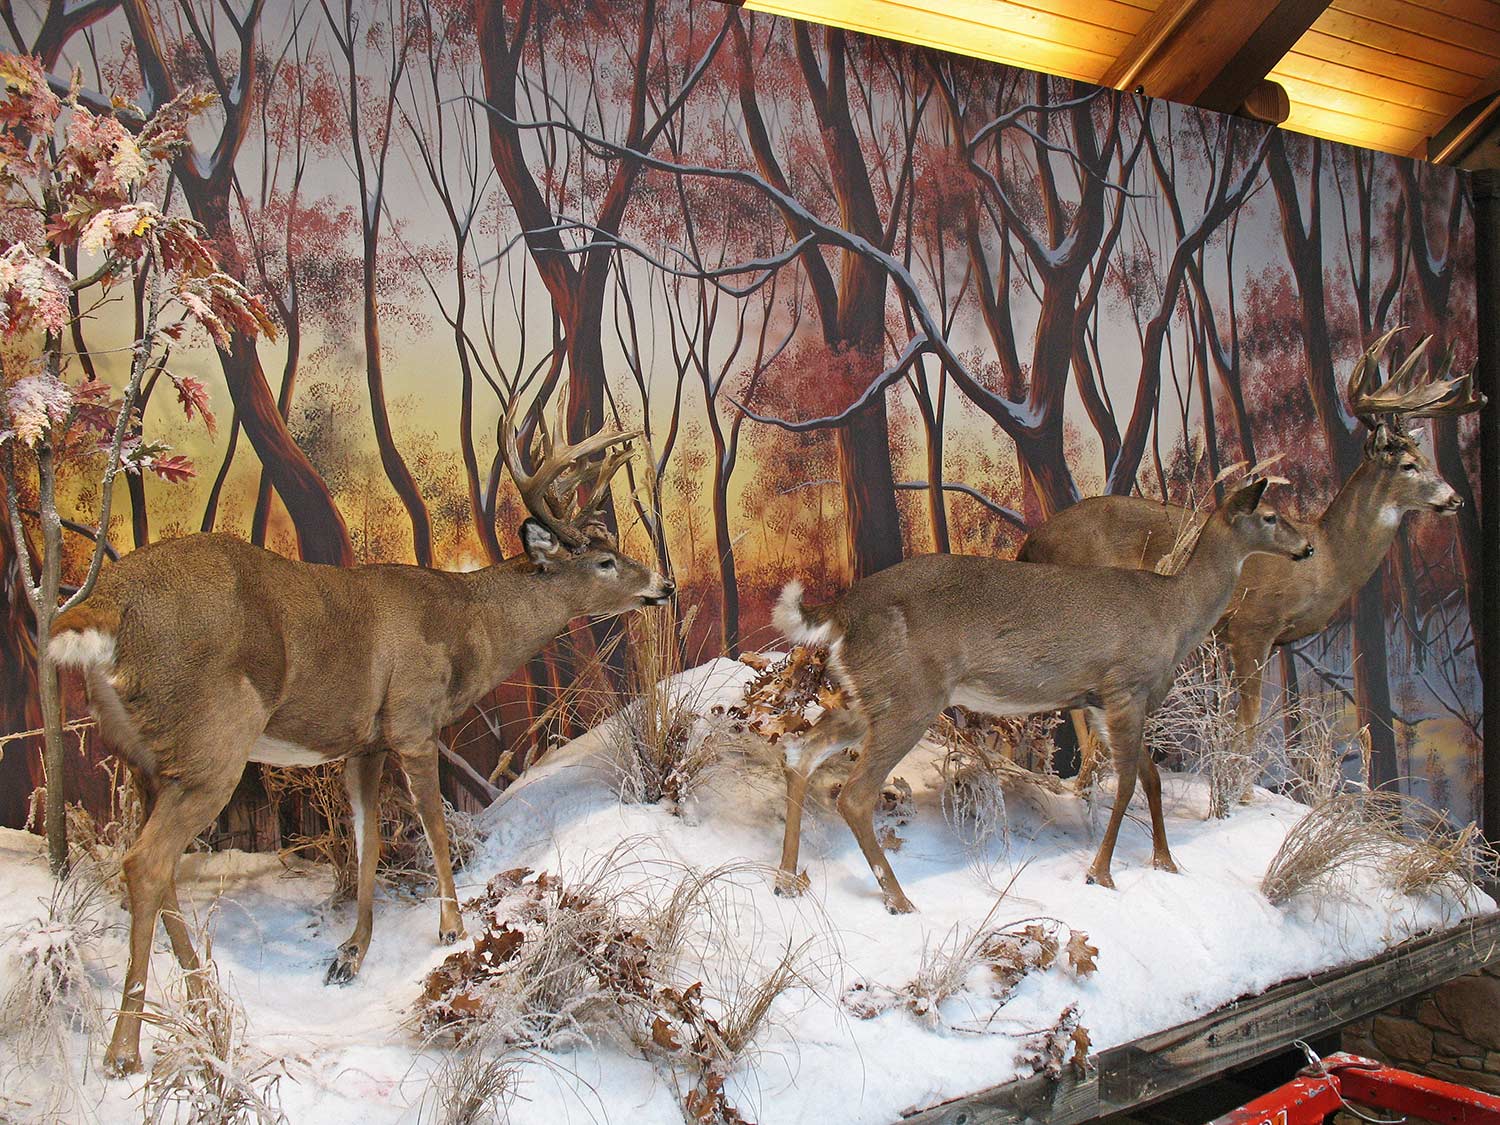 Mural Diorama on Canvas for Corporate Sporting Goods Chain